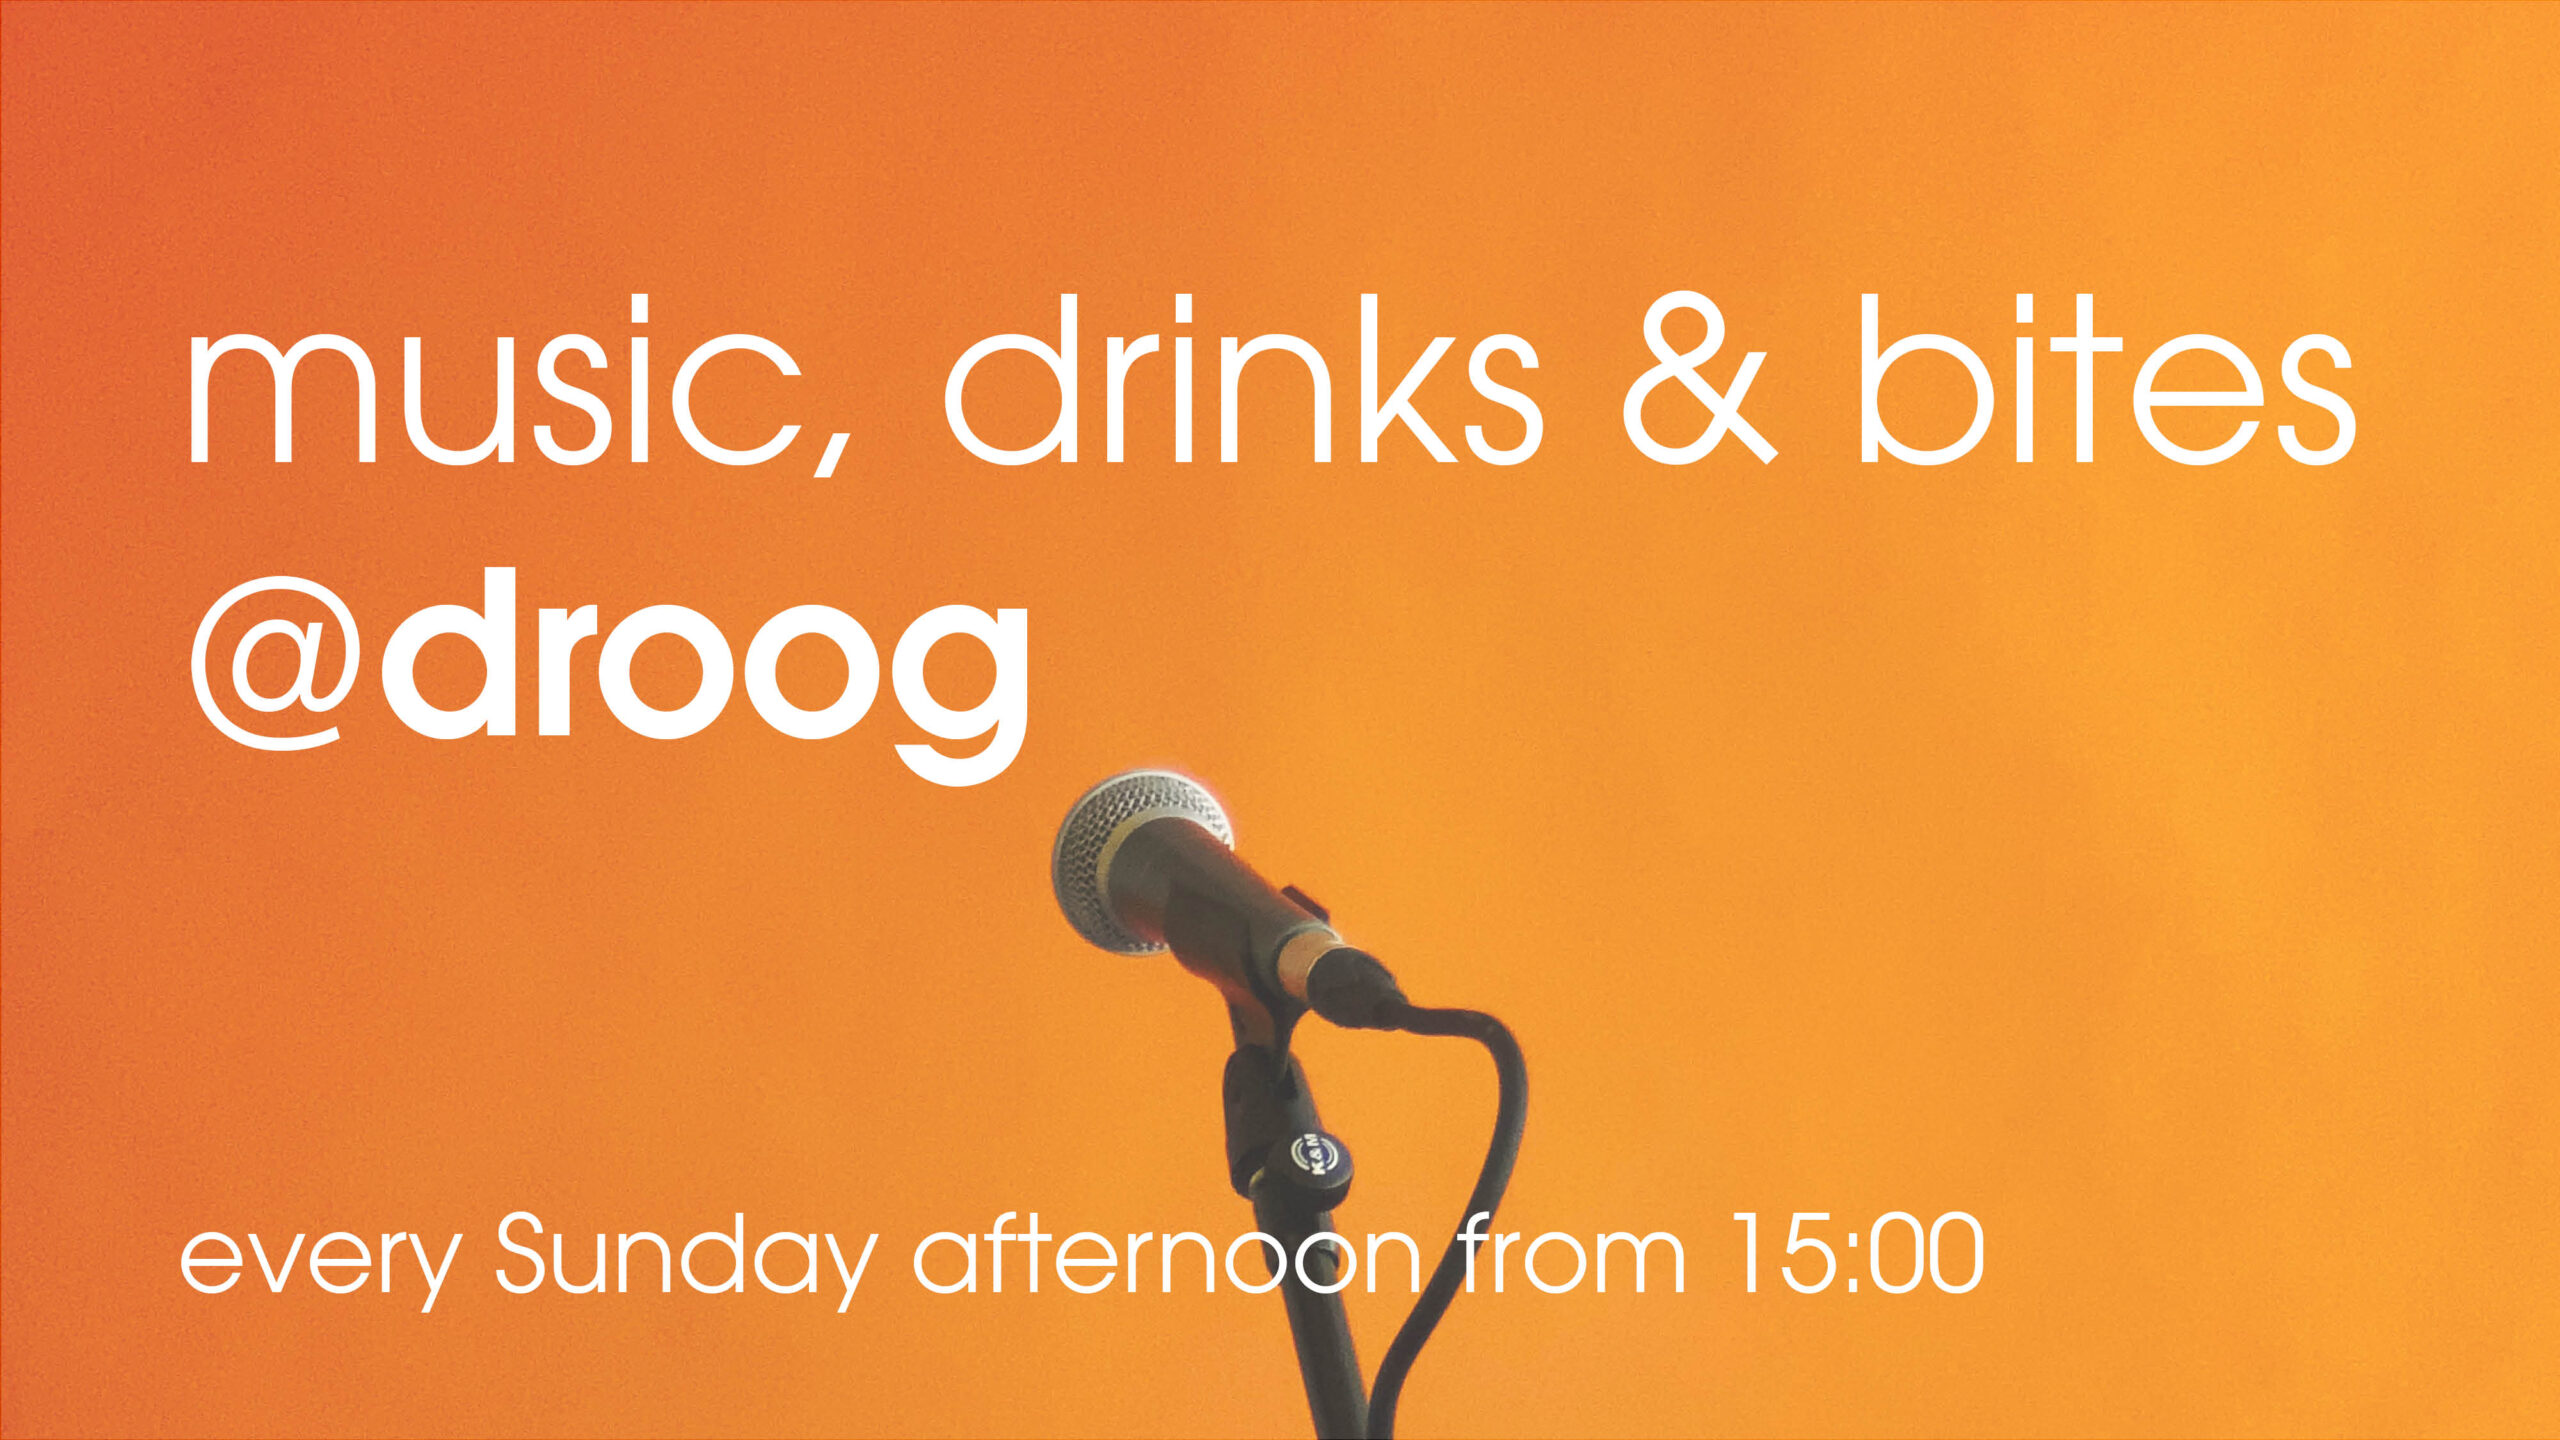 introducing: new Sunday Afternoon sessions